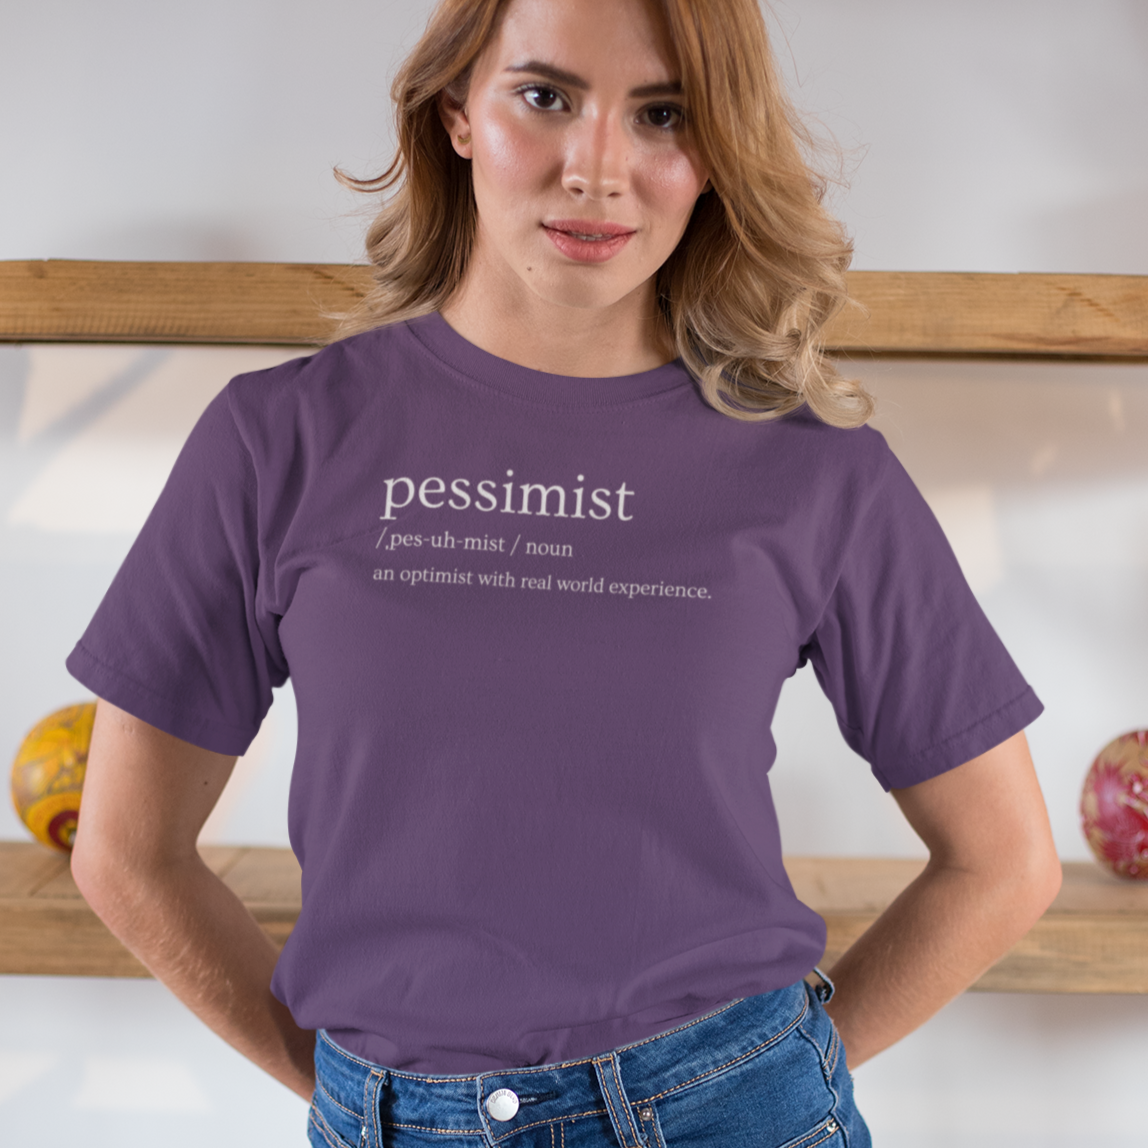 pessimist-an-optimist-with-real-world-experience-team-purple-t-shirt-mockup-of-a-woman-wearing-a-denim-skirt